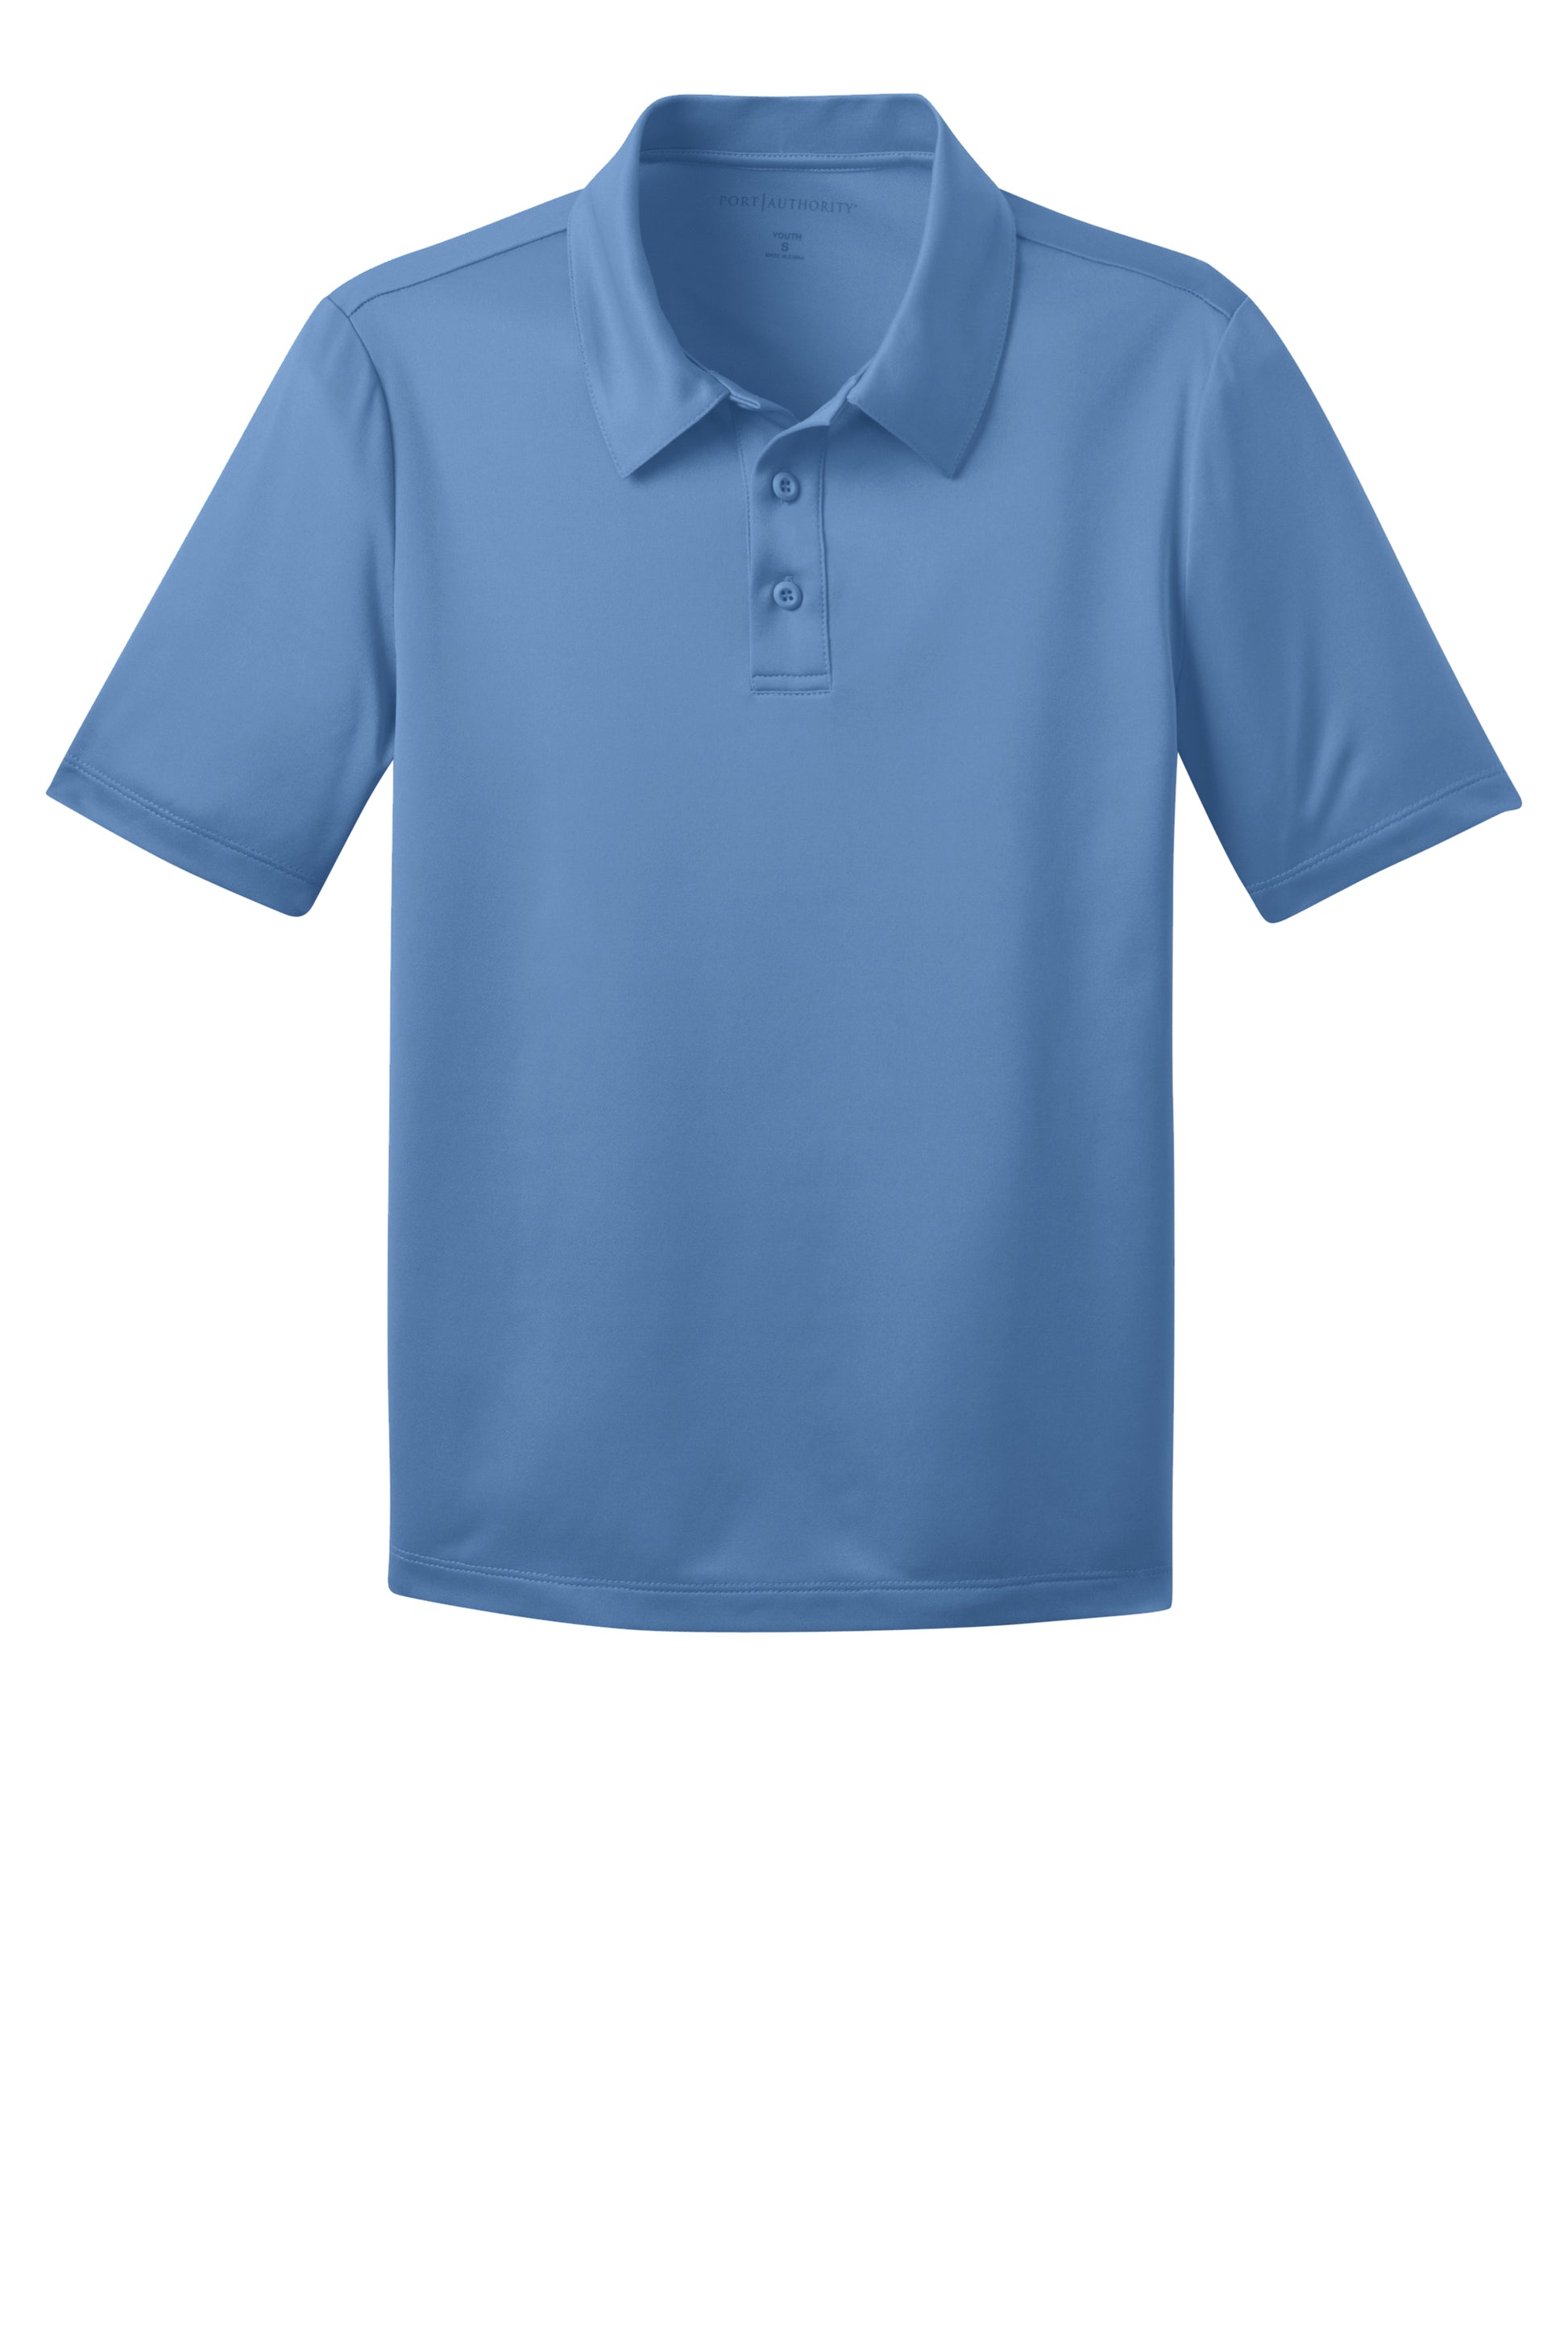 port authority youth silk touch performance polo carolina blue